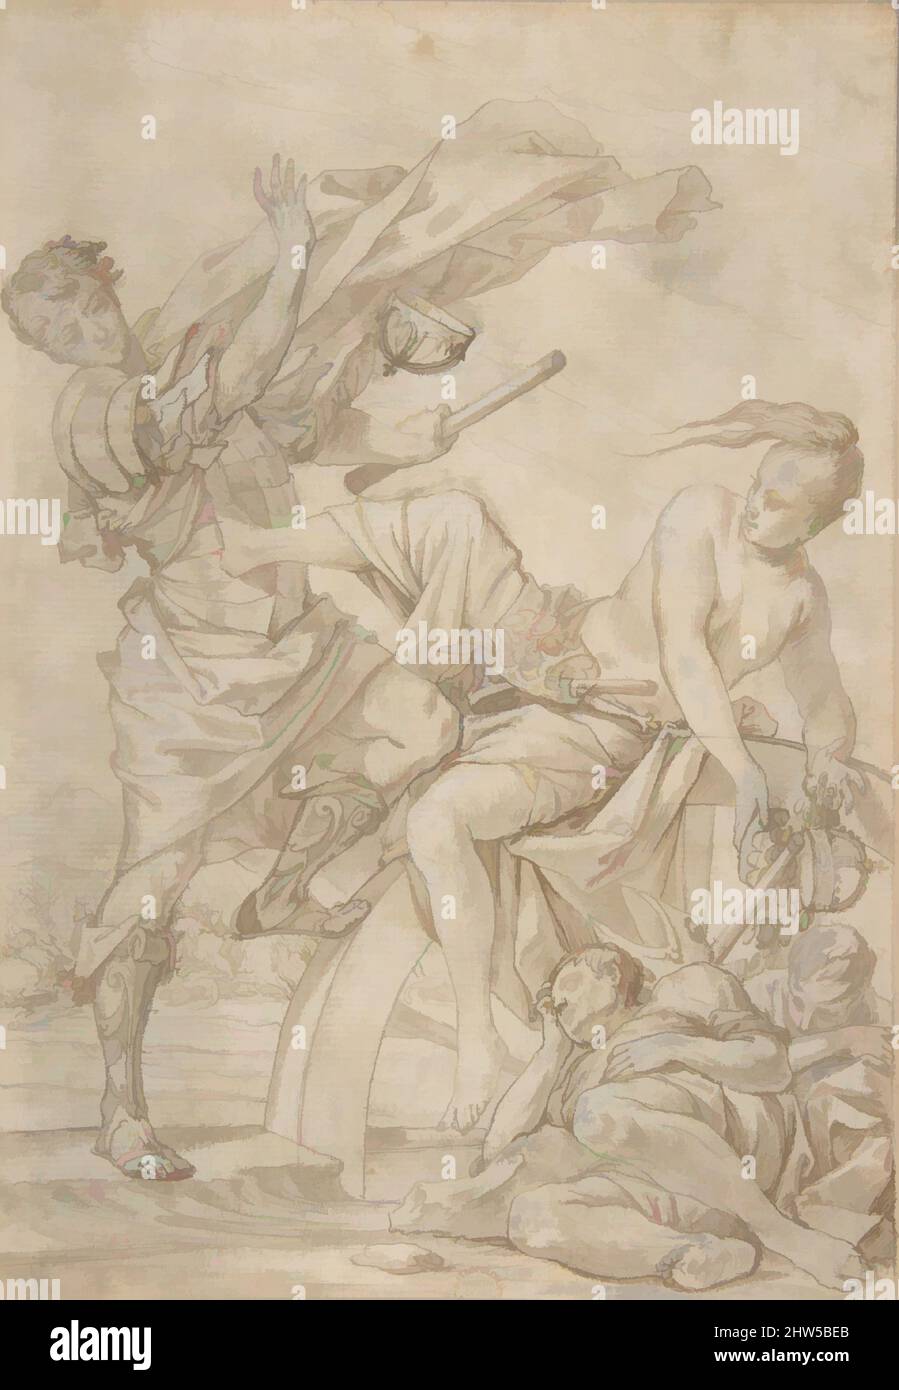 Art inspired by Allegory of Fortune, 1612–50, Pen and brown ink, brown wash, over black chalk, highlighted with white, 12 x 8 3/8in. (30.5 x 21.3cm), Drawings, attributed to Pietro Testa (Italian, Lucca 1612–1650 Rome, Classic works modernized by Artotop with a splash of modernity. Shapes, color and value, eye-catching visual impact on art. Emotions through freedom of artworks in a contemporary way. A timeless message pursuing a wildly creative new direction. Artists turning to the digital medium and creating the Artotop NFT Stock Photo